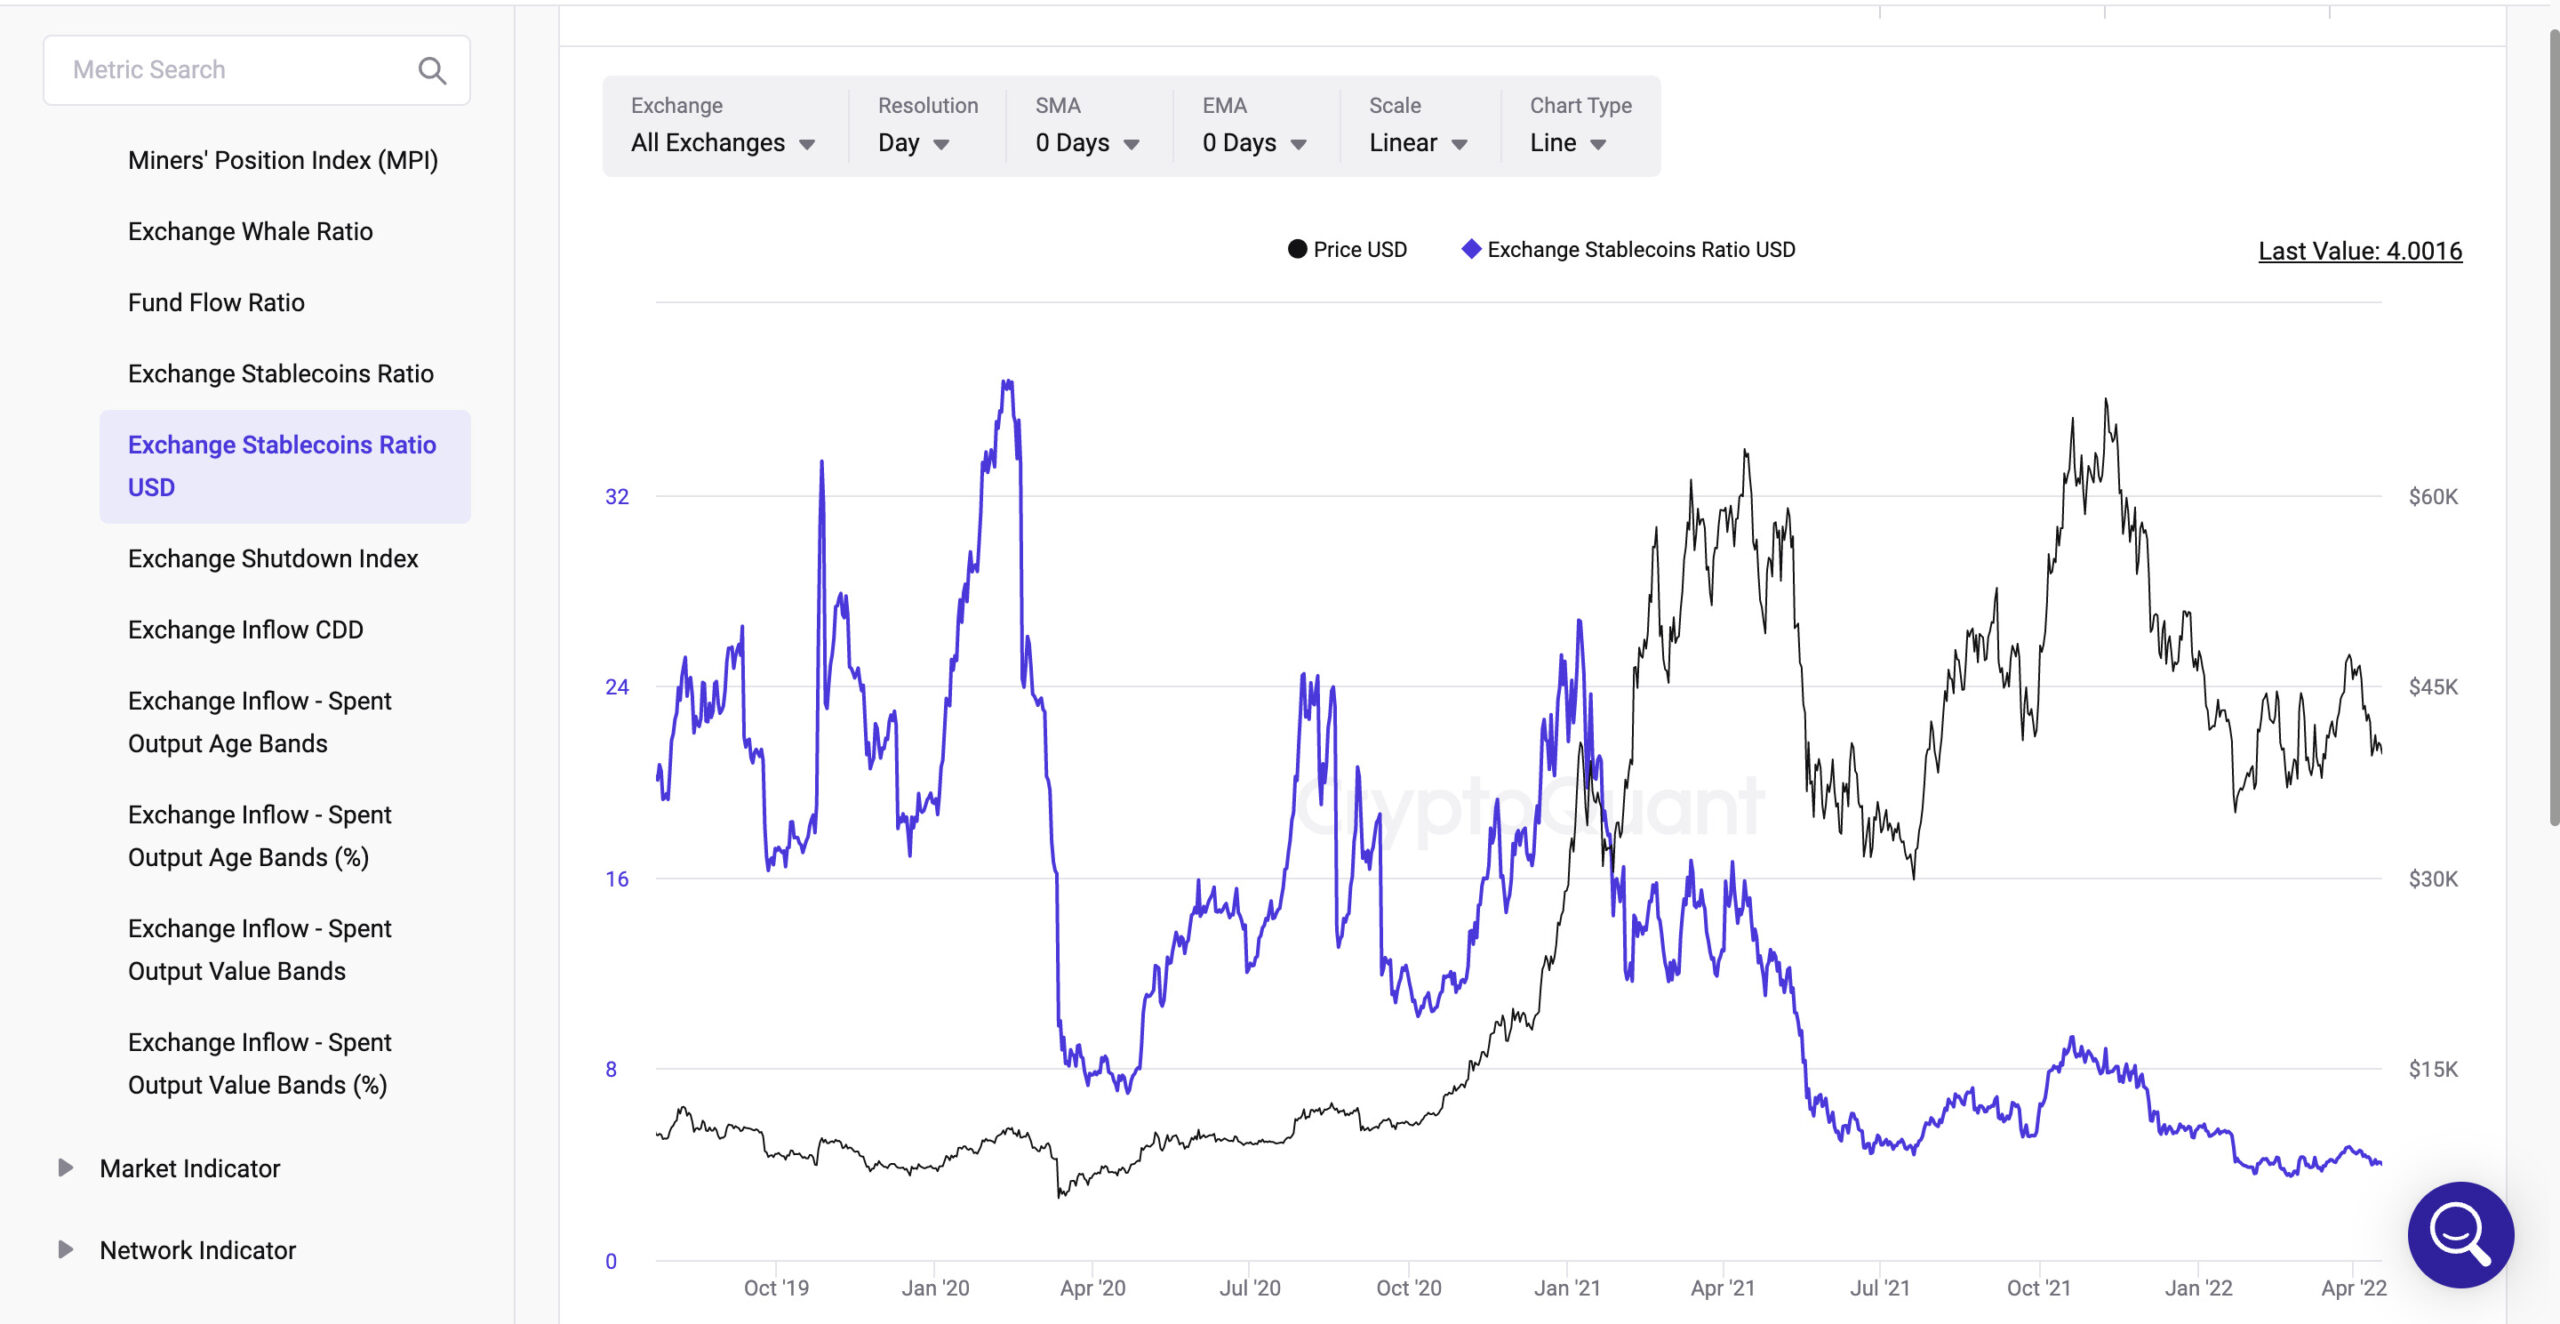 Exchange Stablecoins Ratio USD